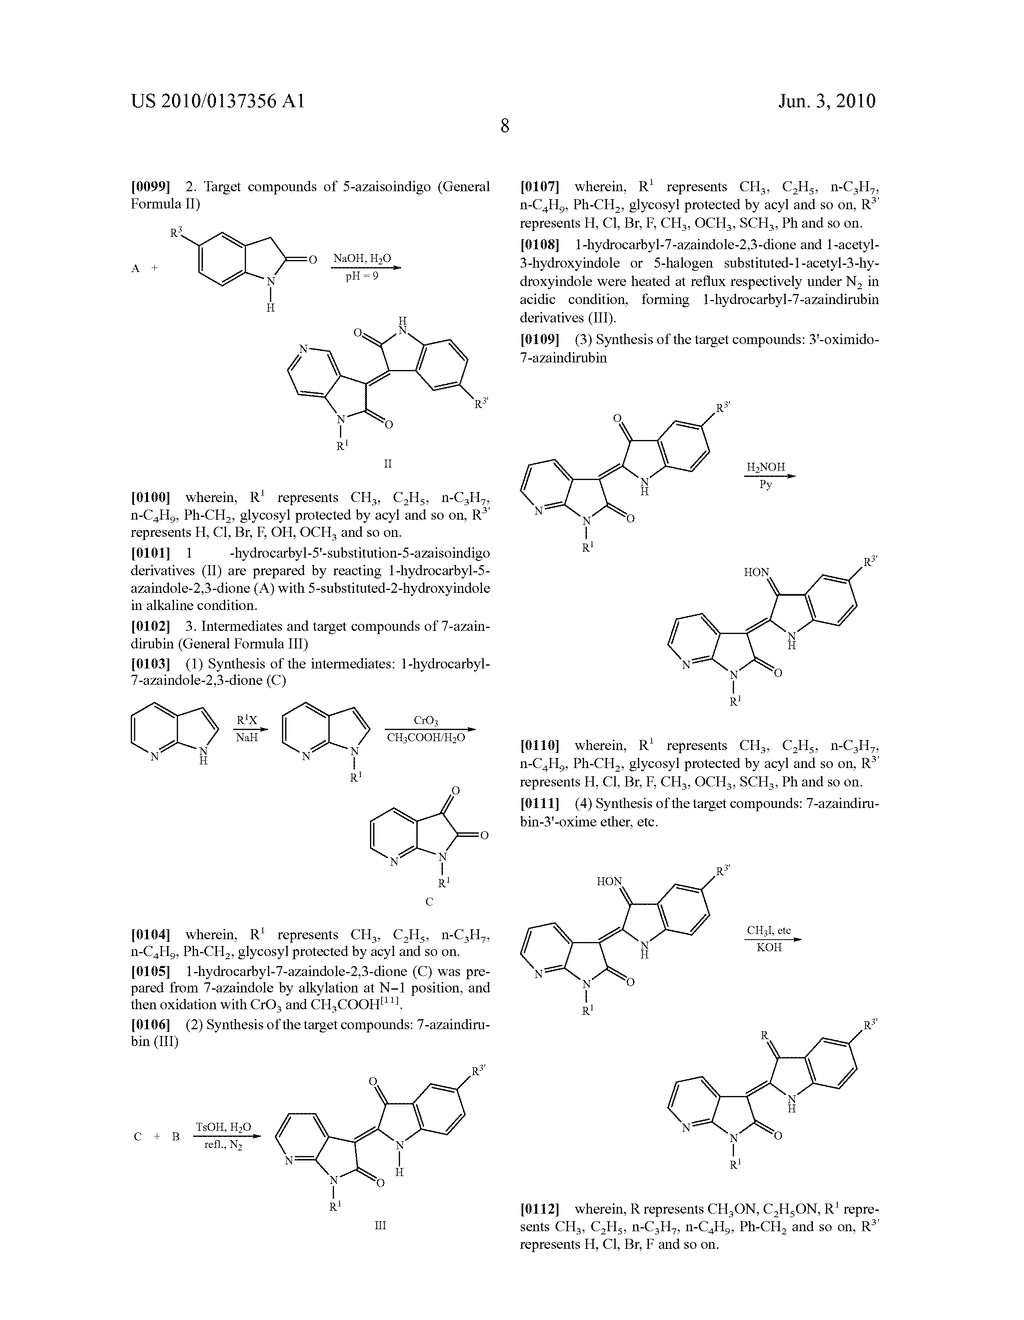 AZAINDOLE-INDOLE COUPLED DERIVATIVES, PREPARATION METHODS AND USES THEREOF - diagram, schematic, and image 10